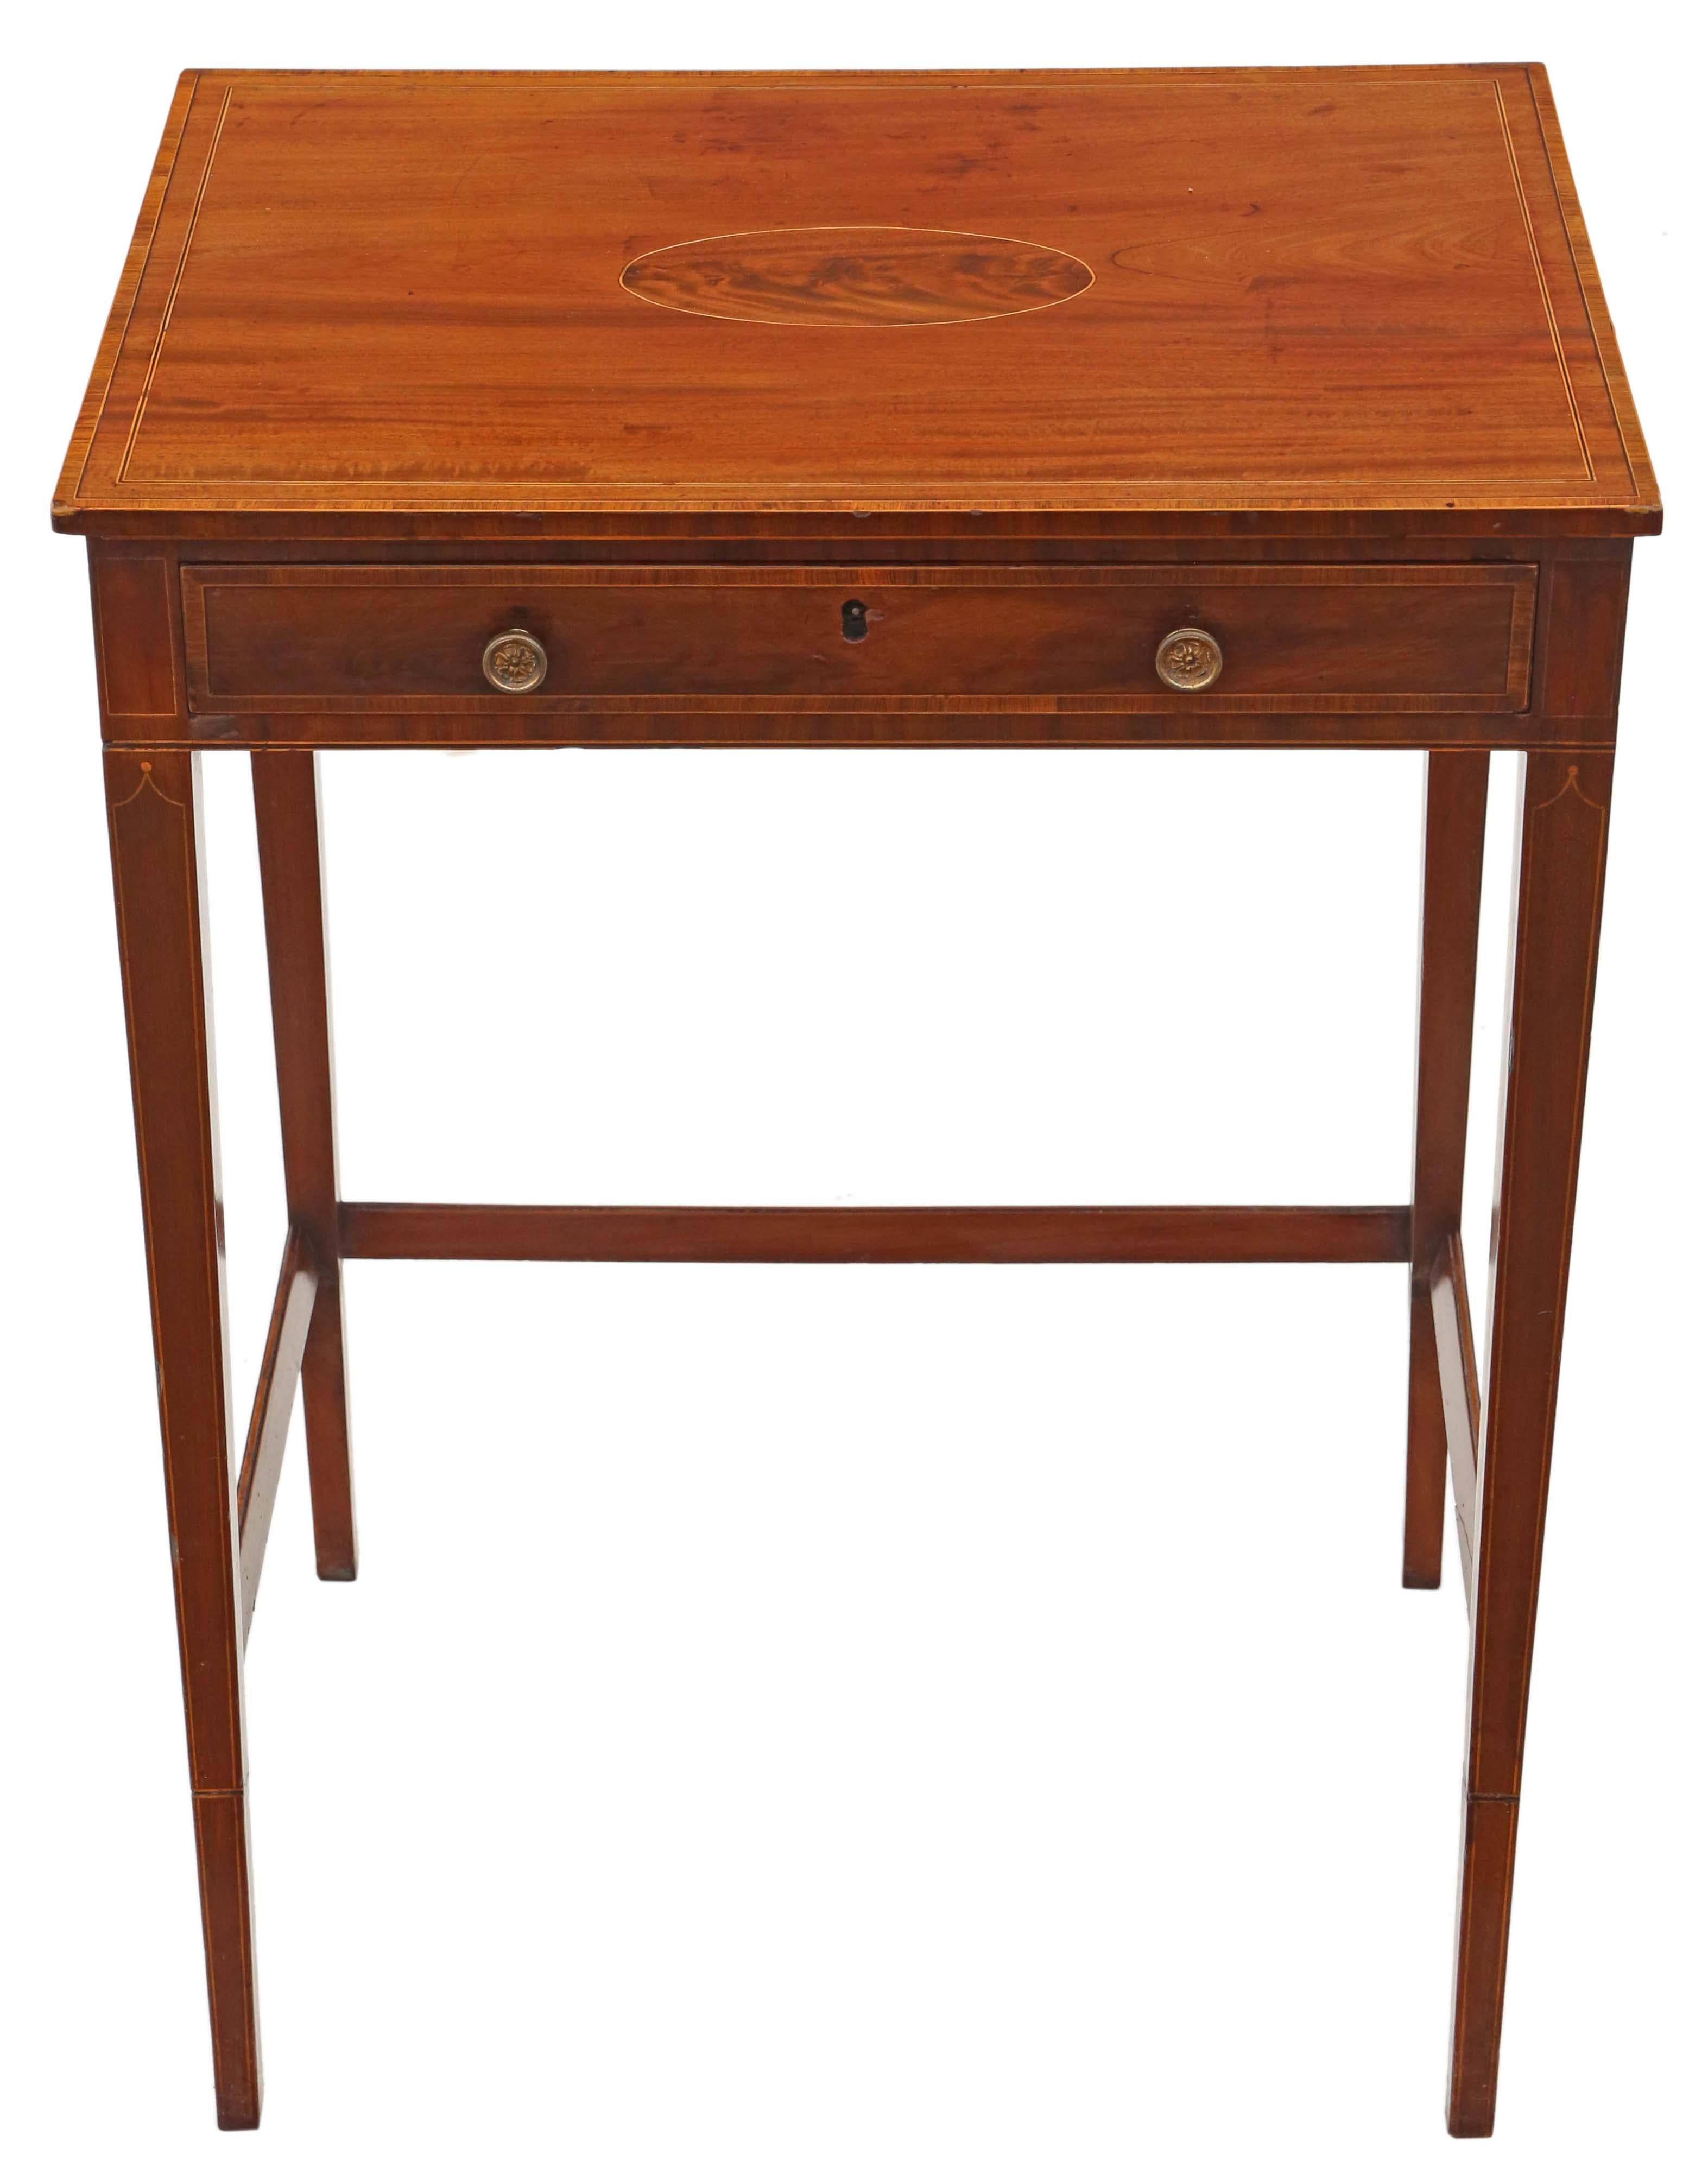 Antique fine quality early 19th century inlaid mahogany writing side table desk by Edwards and Roberts. Lovely age colour and patina.

No loose joints and no woodworm. Full of age, character and charm. The drawer slides freely and includes a baize